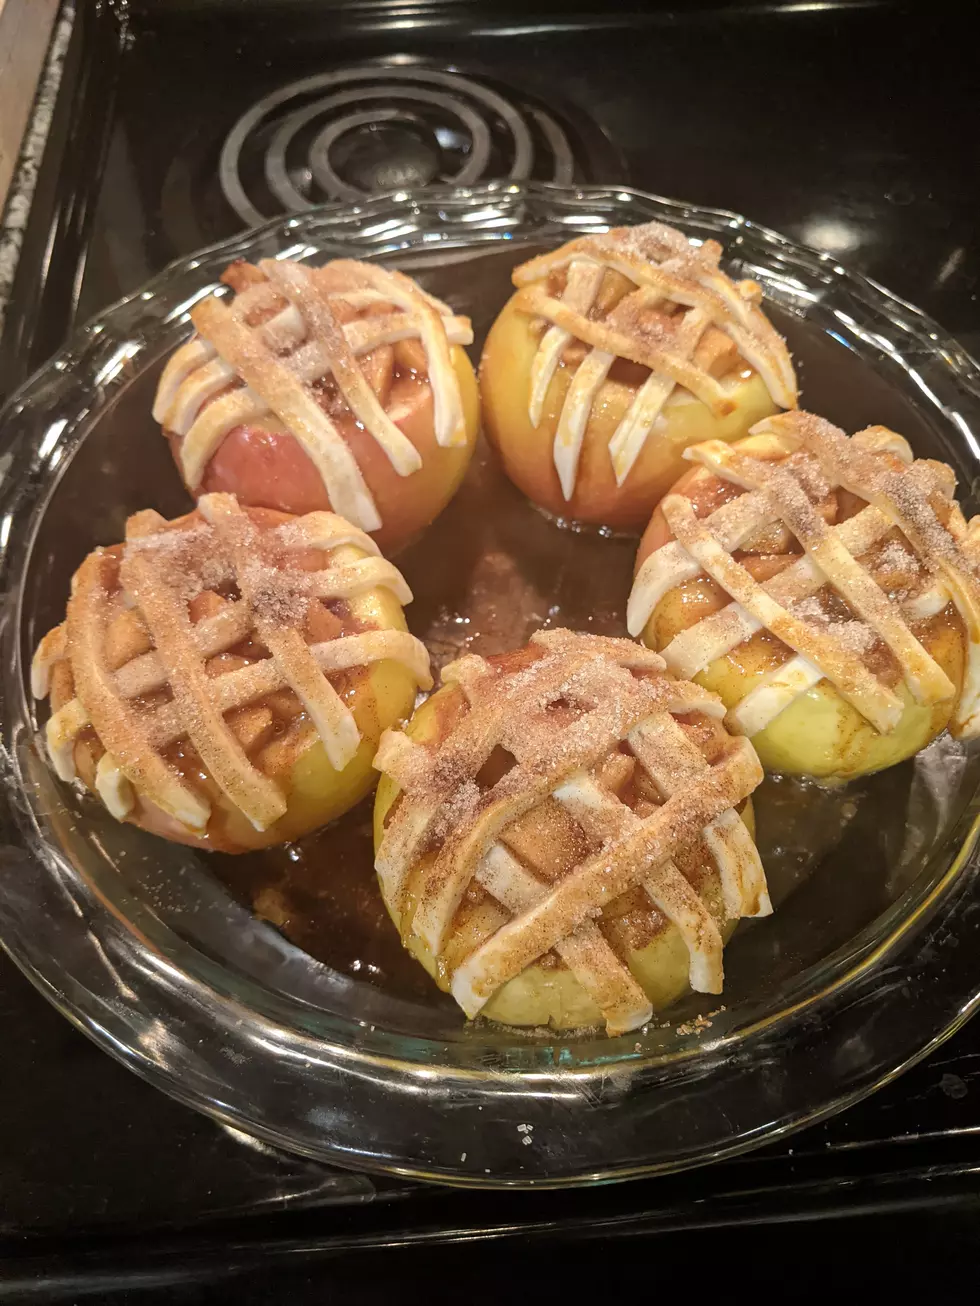 Make Delicious Apple Pie Baked Apples [Gallery]